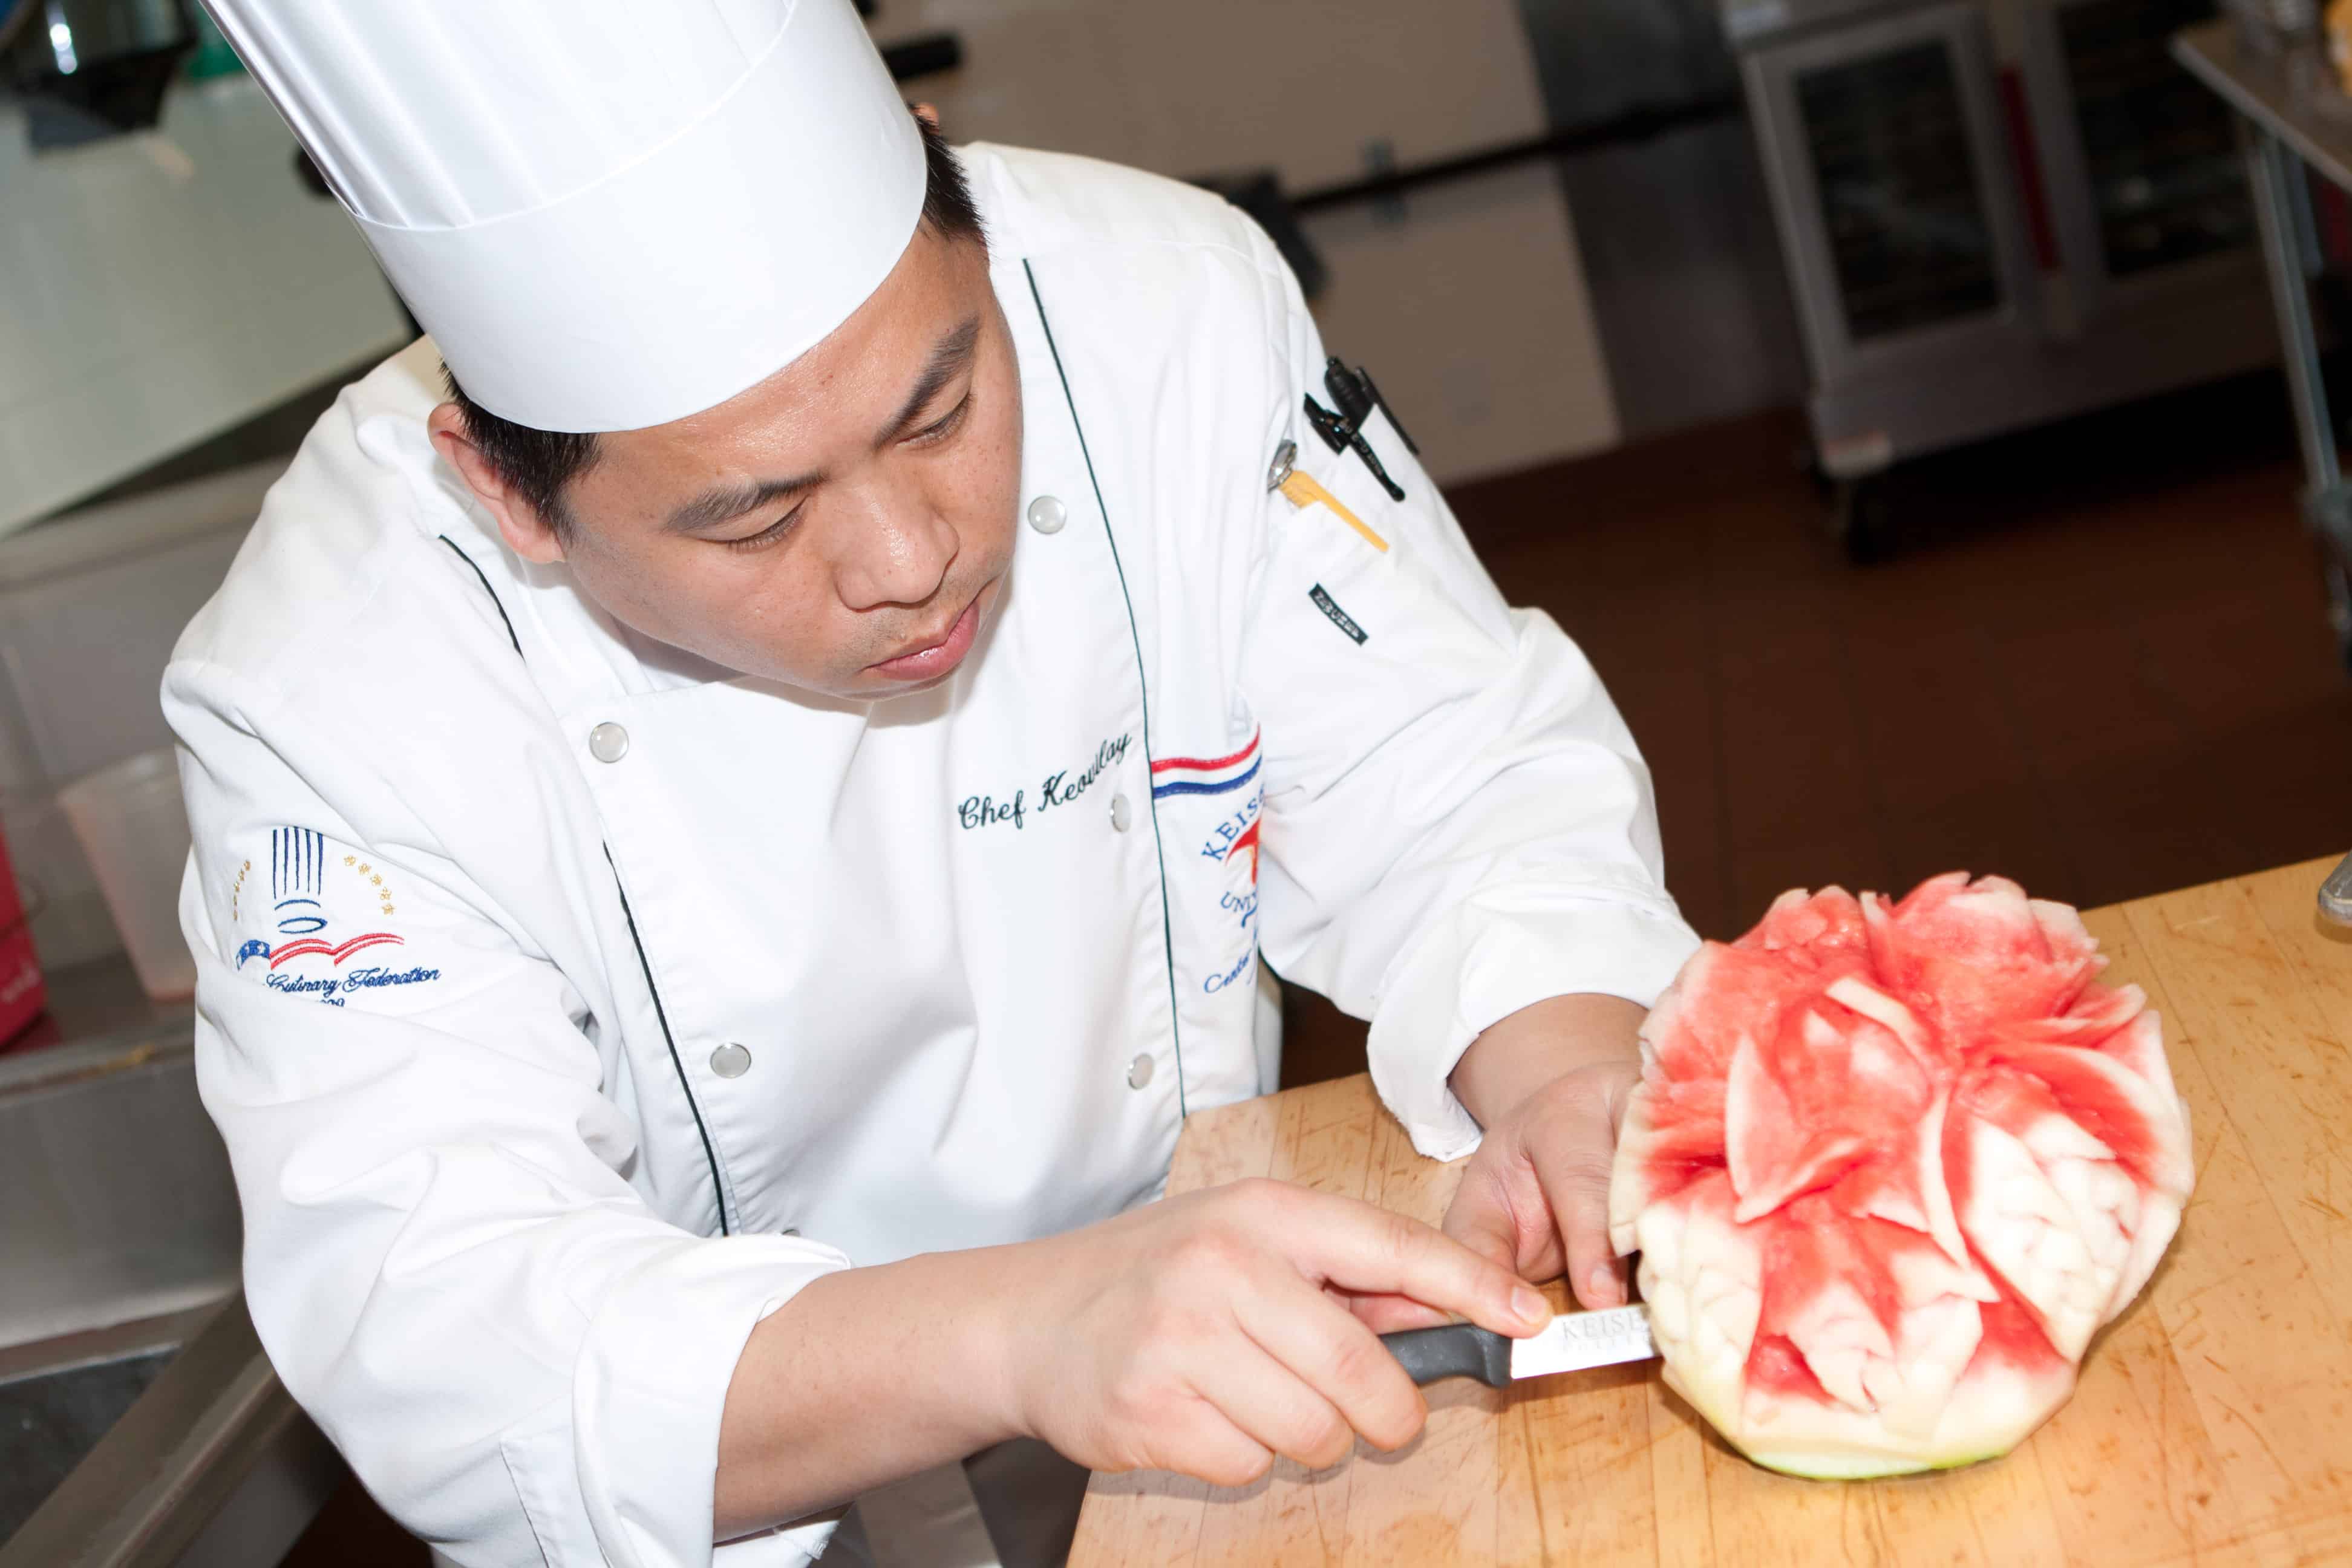 STAFF SPOTLIGHT: Chef Keovilay Featured in the American Culinary Federation’s magazine, Sizzle